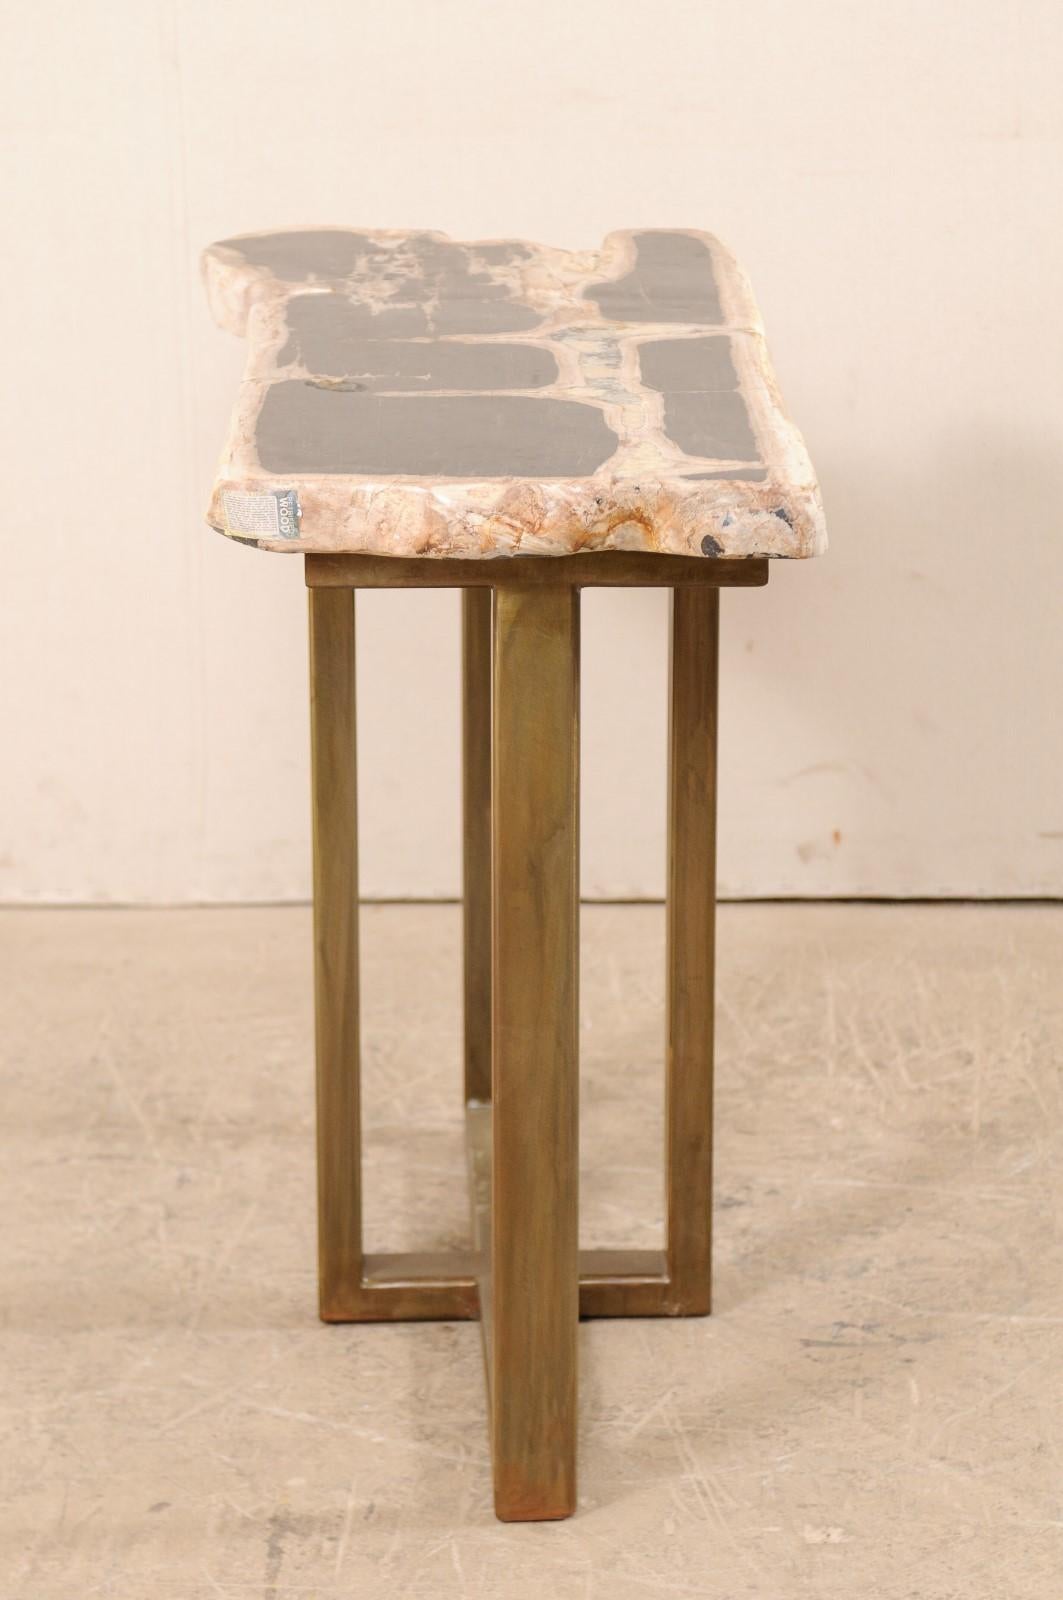 Petrified Wood Console Table with Modern Metal Base In Good Condition For Sale In Atlanta, GA